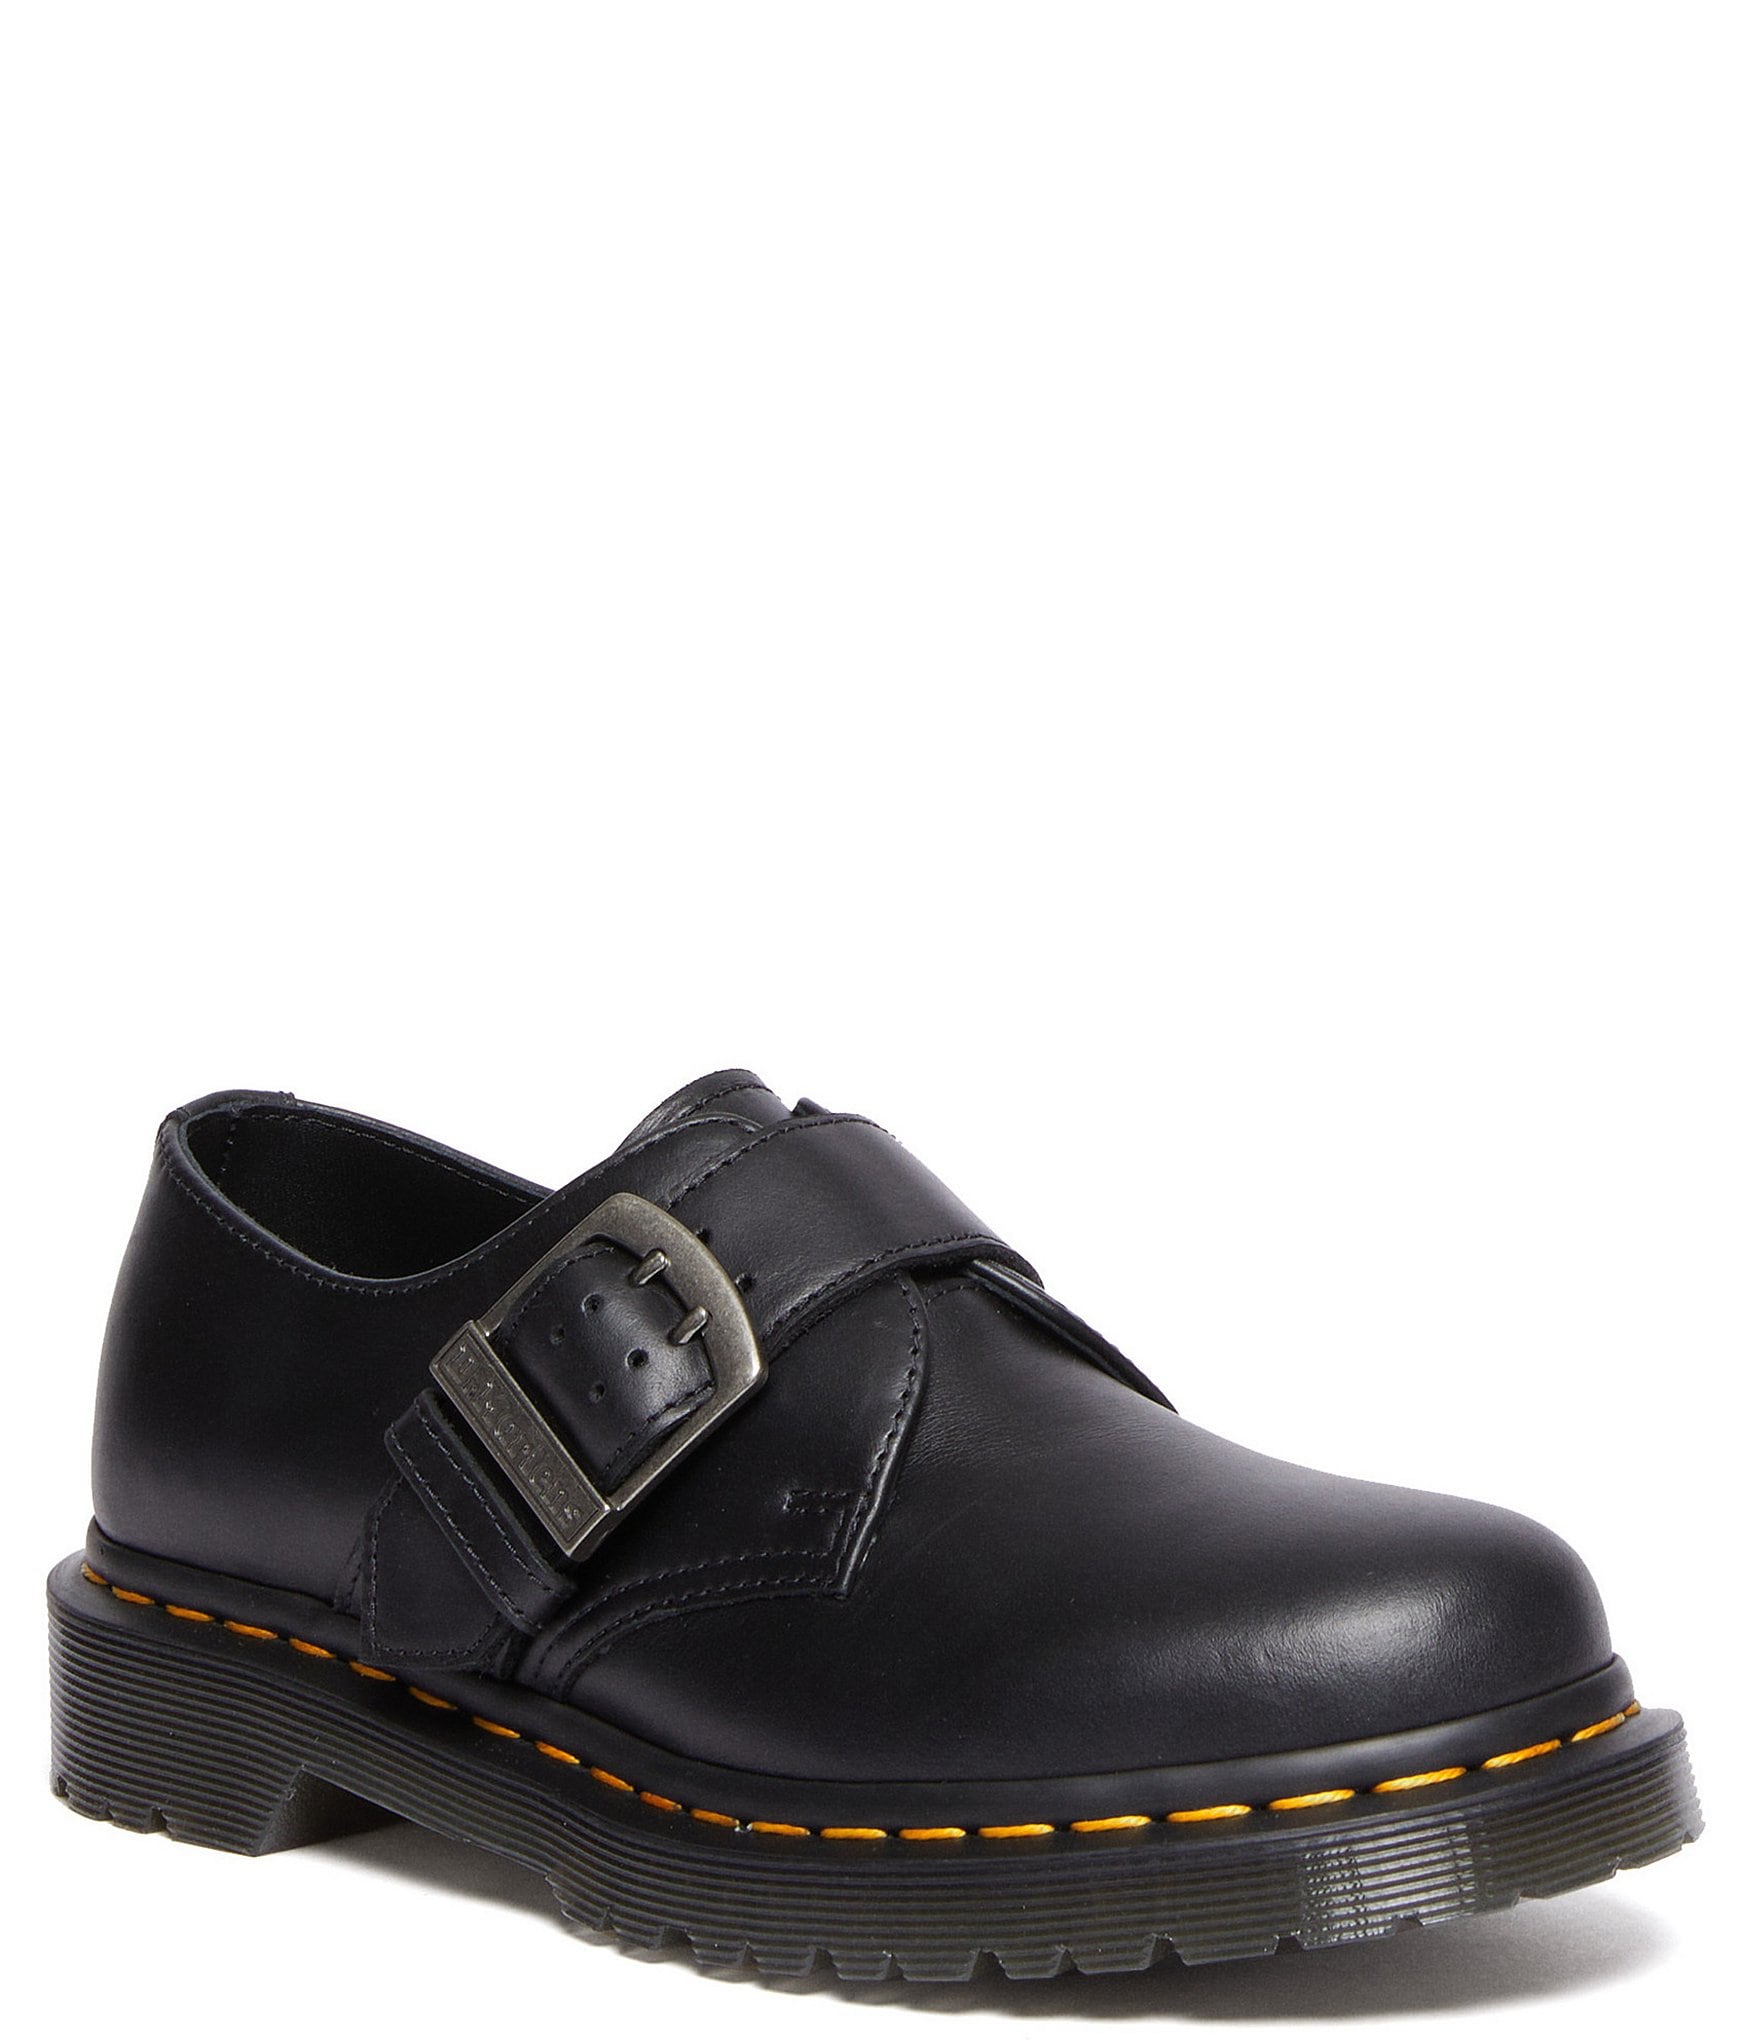 Dr. Martens Women's 1461 Pull Up Buckle Oxford Shoes | Dillard's